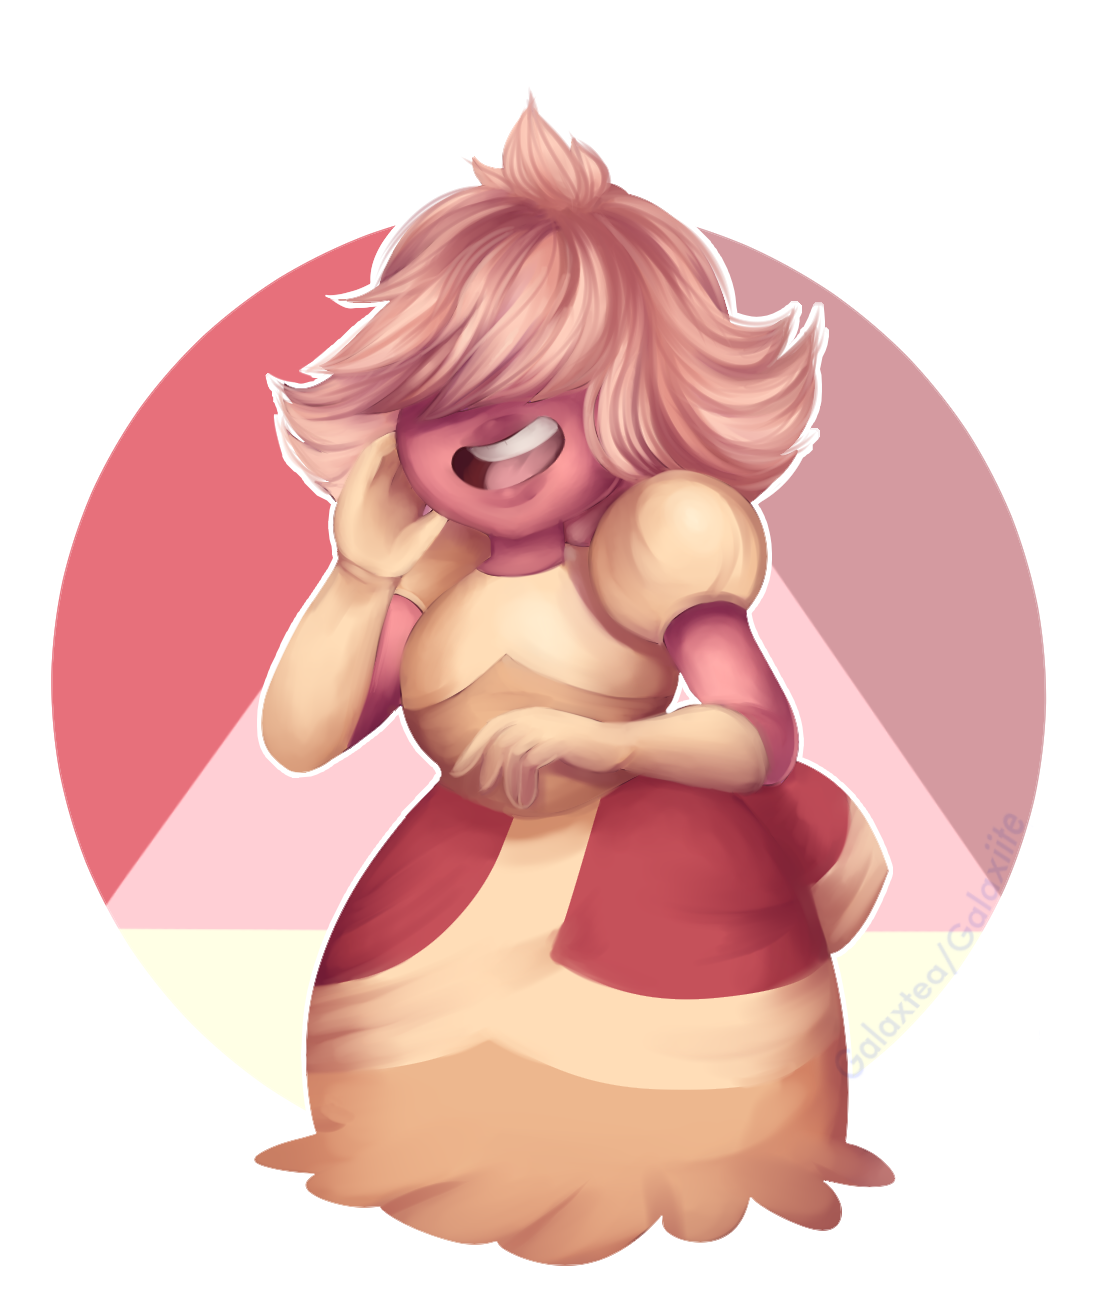 Padparadscha Sapphire is such a cutie